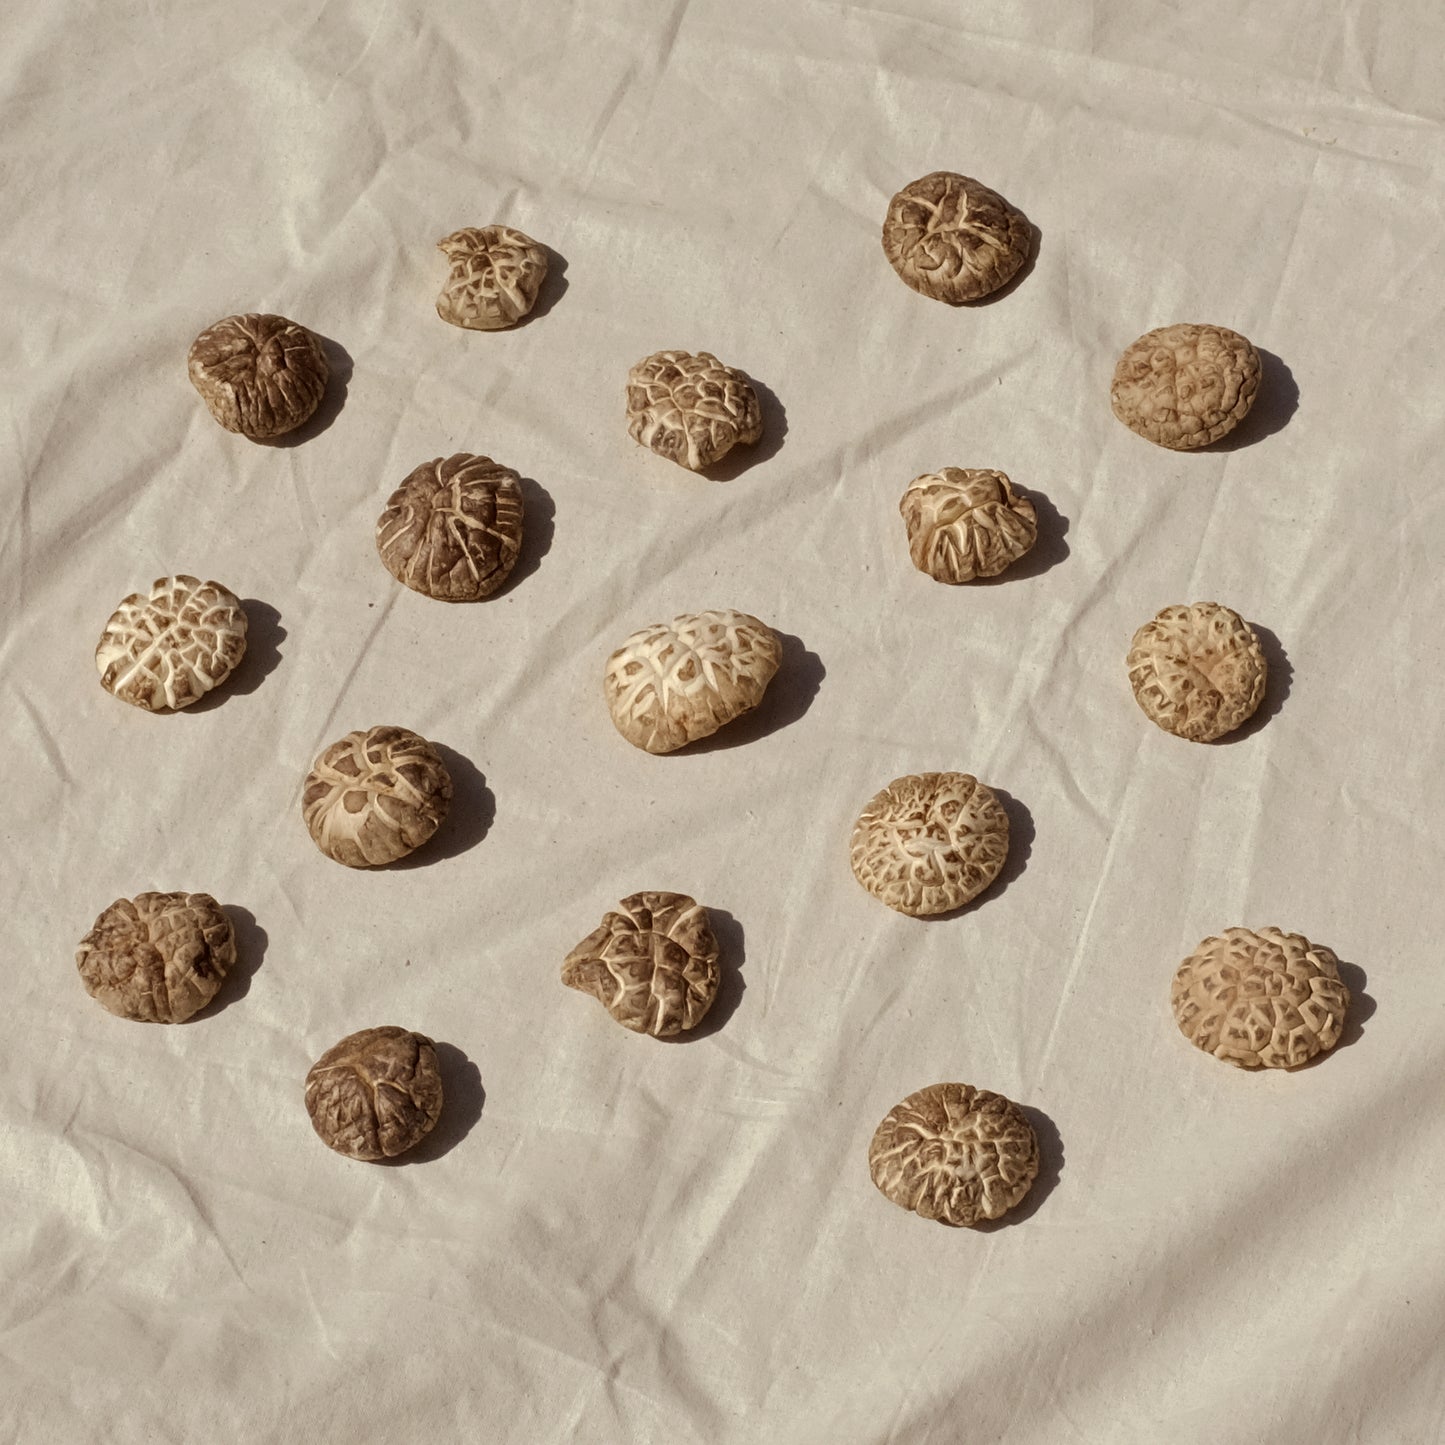 Shiitake mushrooms laid out evenly. Image 2